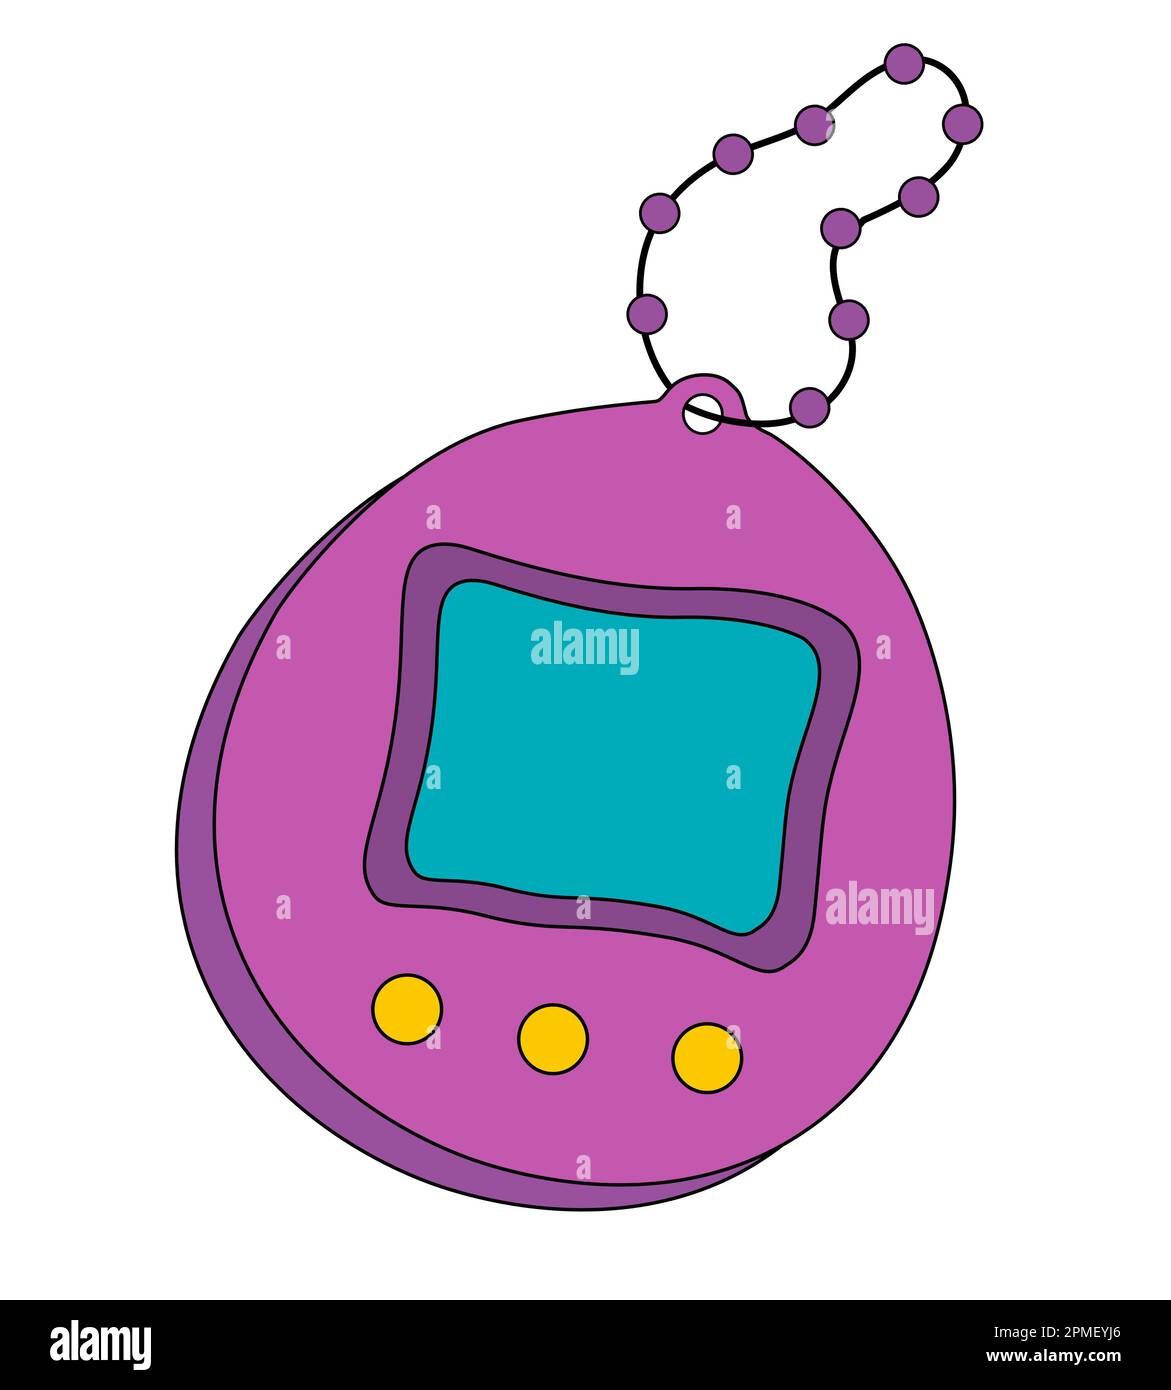 Tamagotchi toy vector illustration. Vintage digital pocket game icon and sticker. Retro purple Tamagotchi with screen display, chain and buttons. Stock Vector